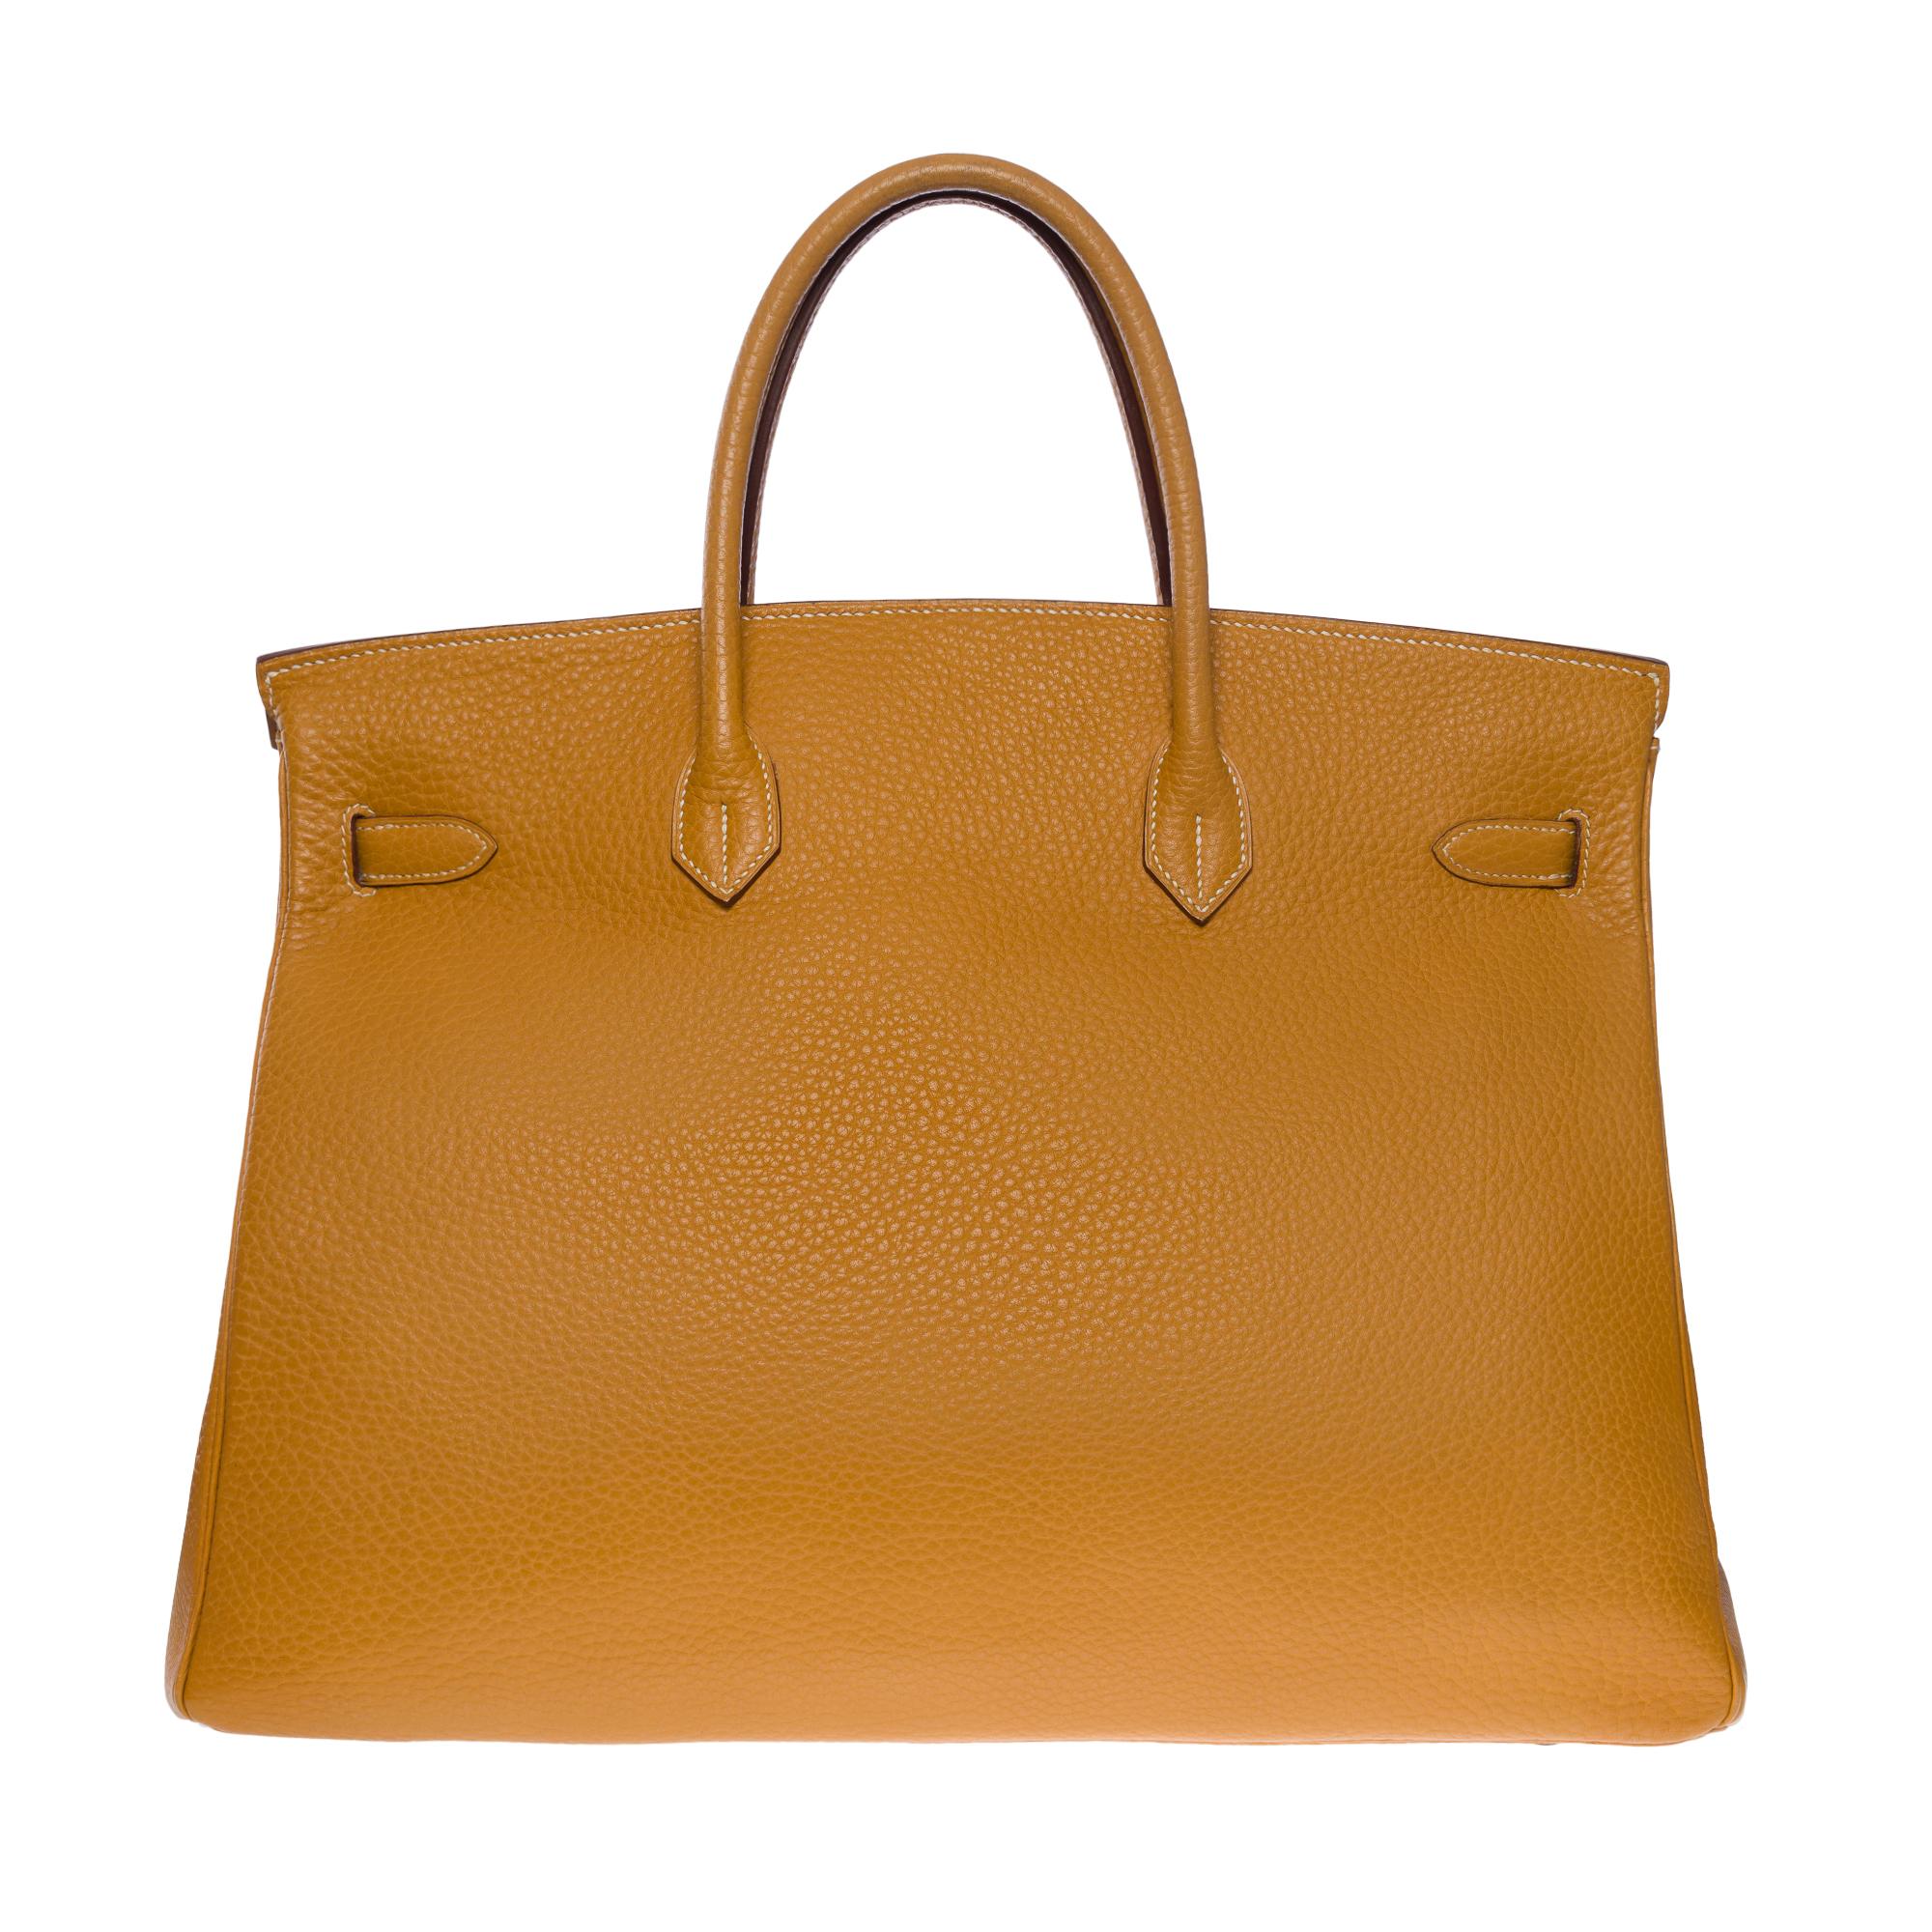 Beautiful Hermès Birkin 40 handbag in Gold Fjord leather , gold plated metal hardware, double handle in gold leather for a hand carry

Flap closure
Inner lining in gold leather, one zippered pocket, one patch pocket
Signature: 